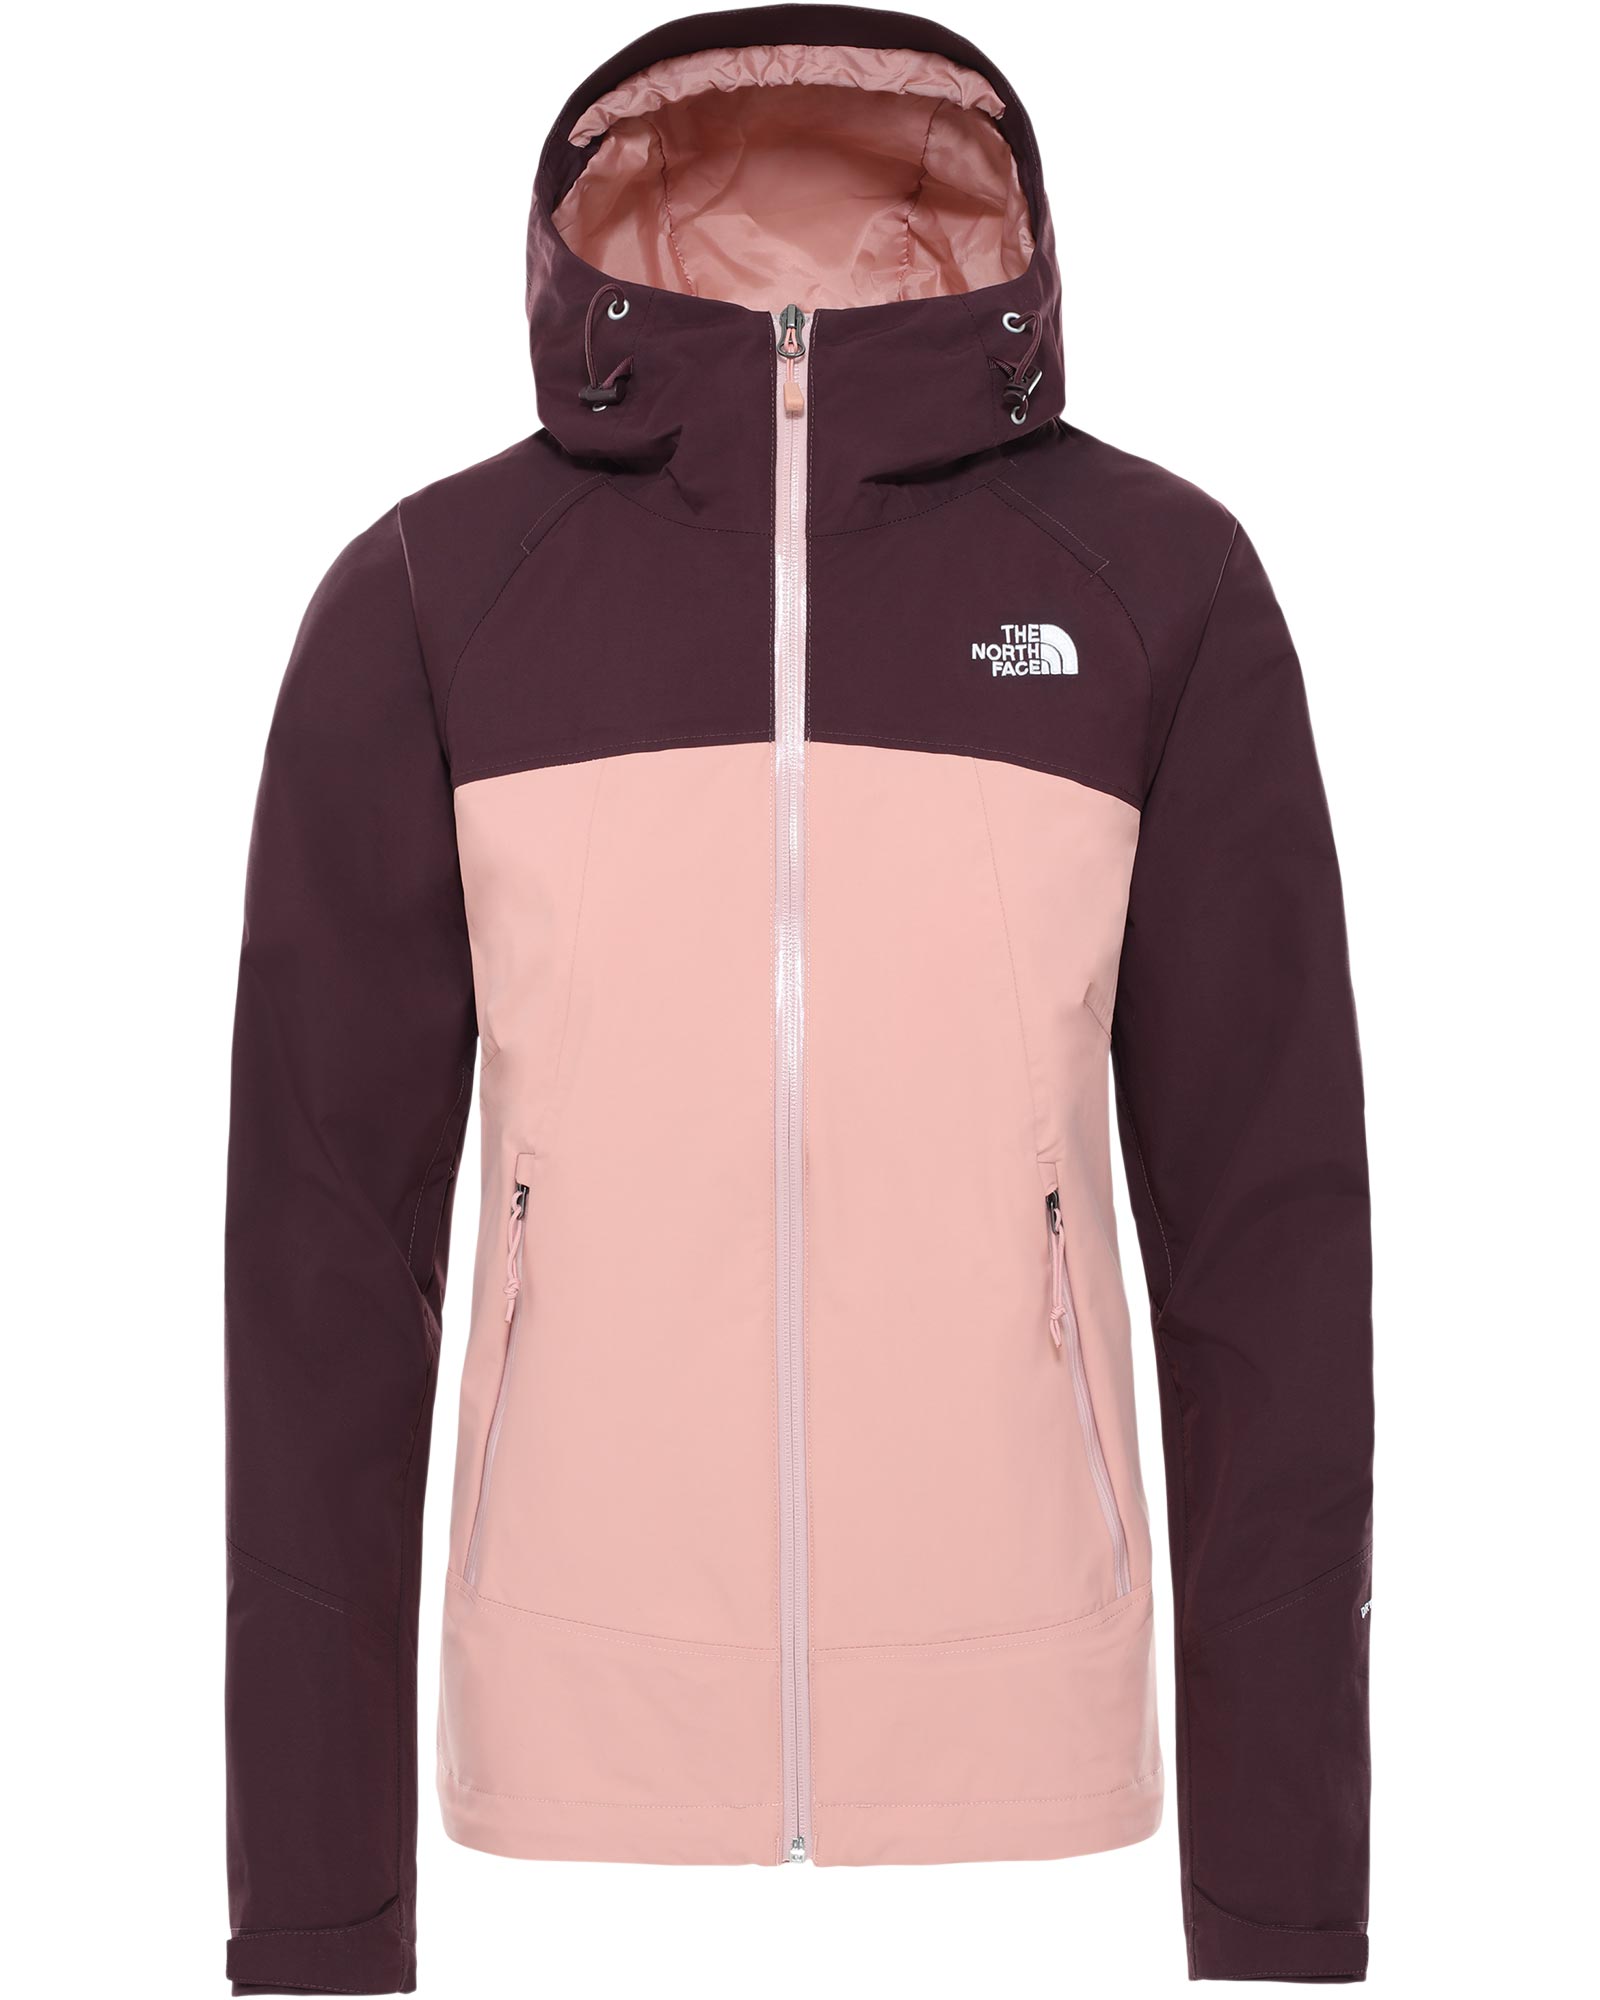 The North Face Stratos DryVent Women’s Jacket - Pink Clay XS